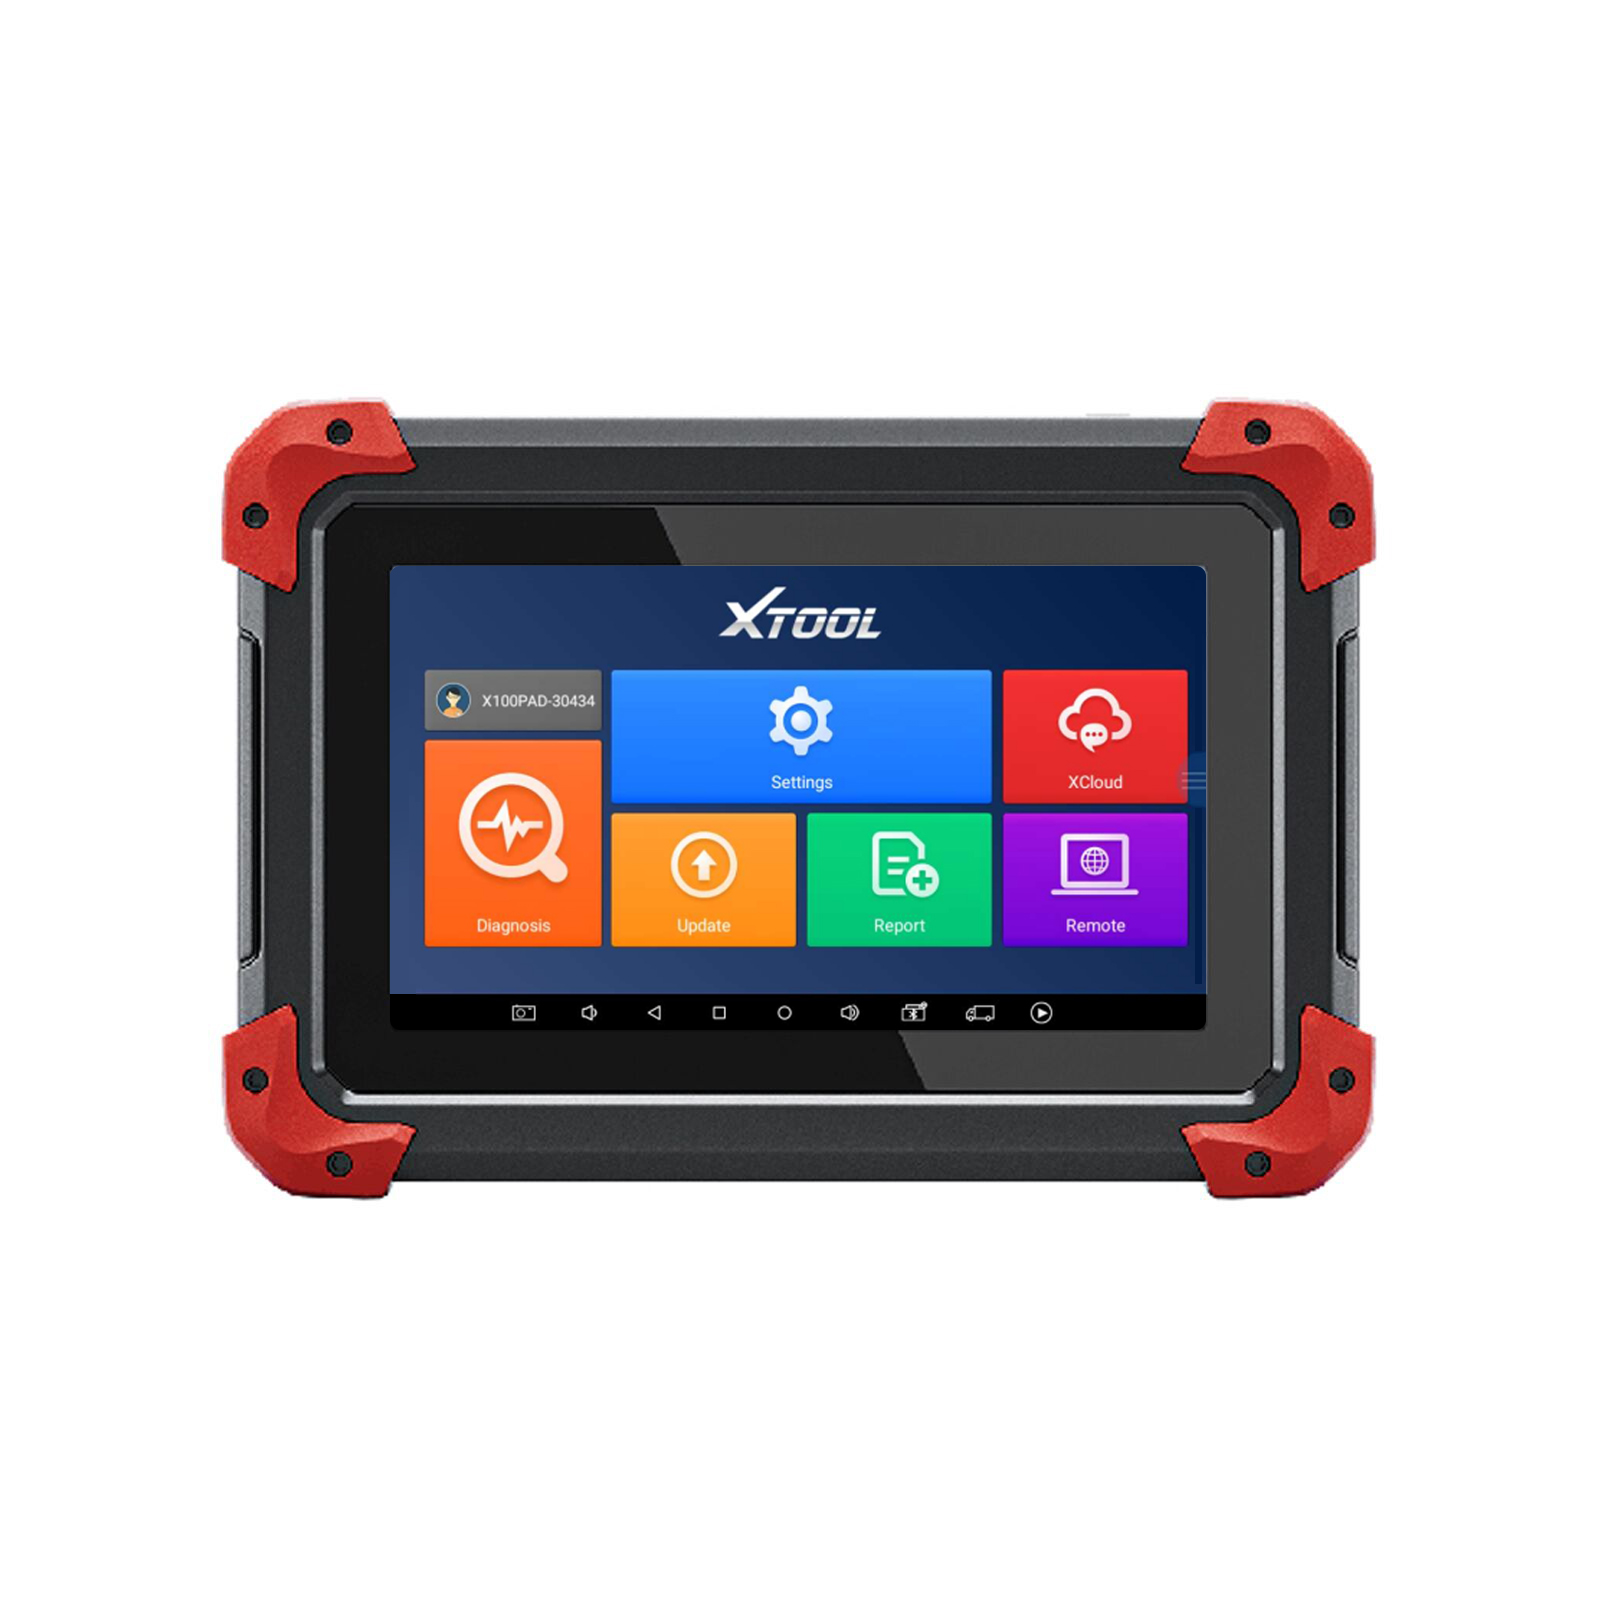 Xtool X100 PAD Plus Car Key Programer OBD2 Full systems Diagnostic Scanner Auto Code Reader IMMO EPB DPF BMS 28+ Reset Function